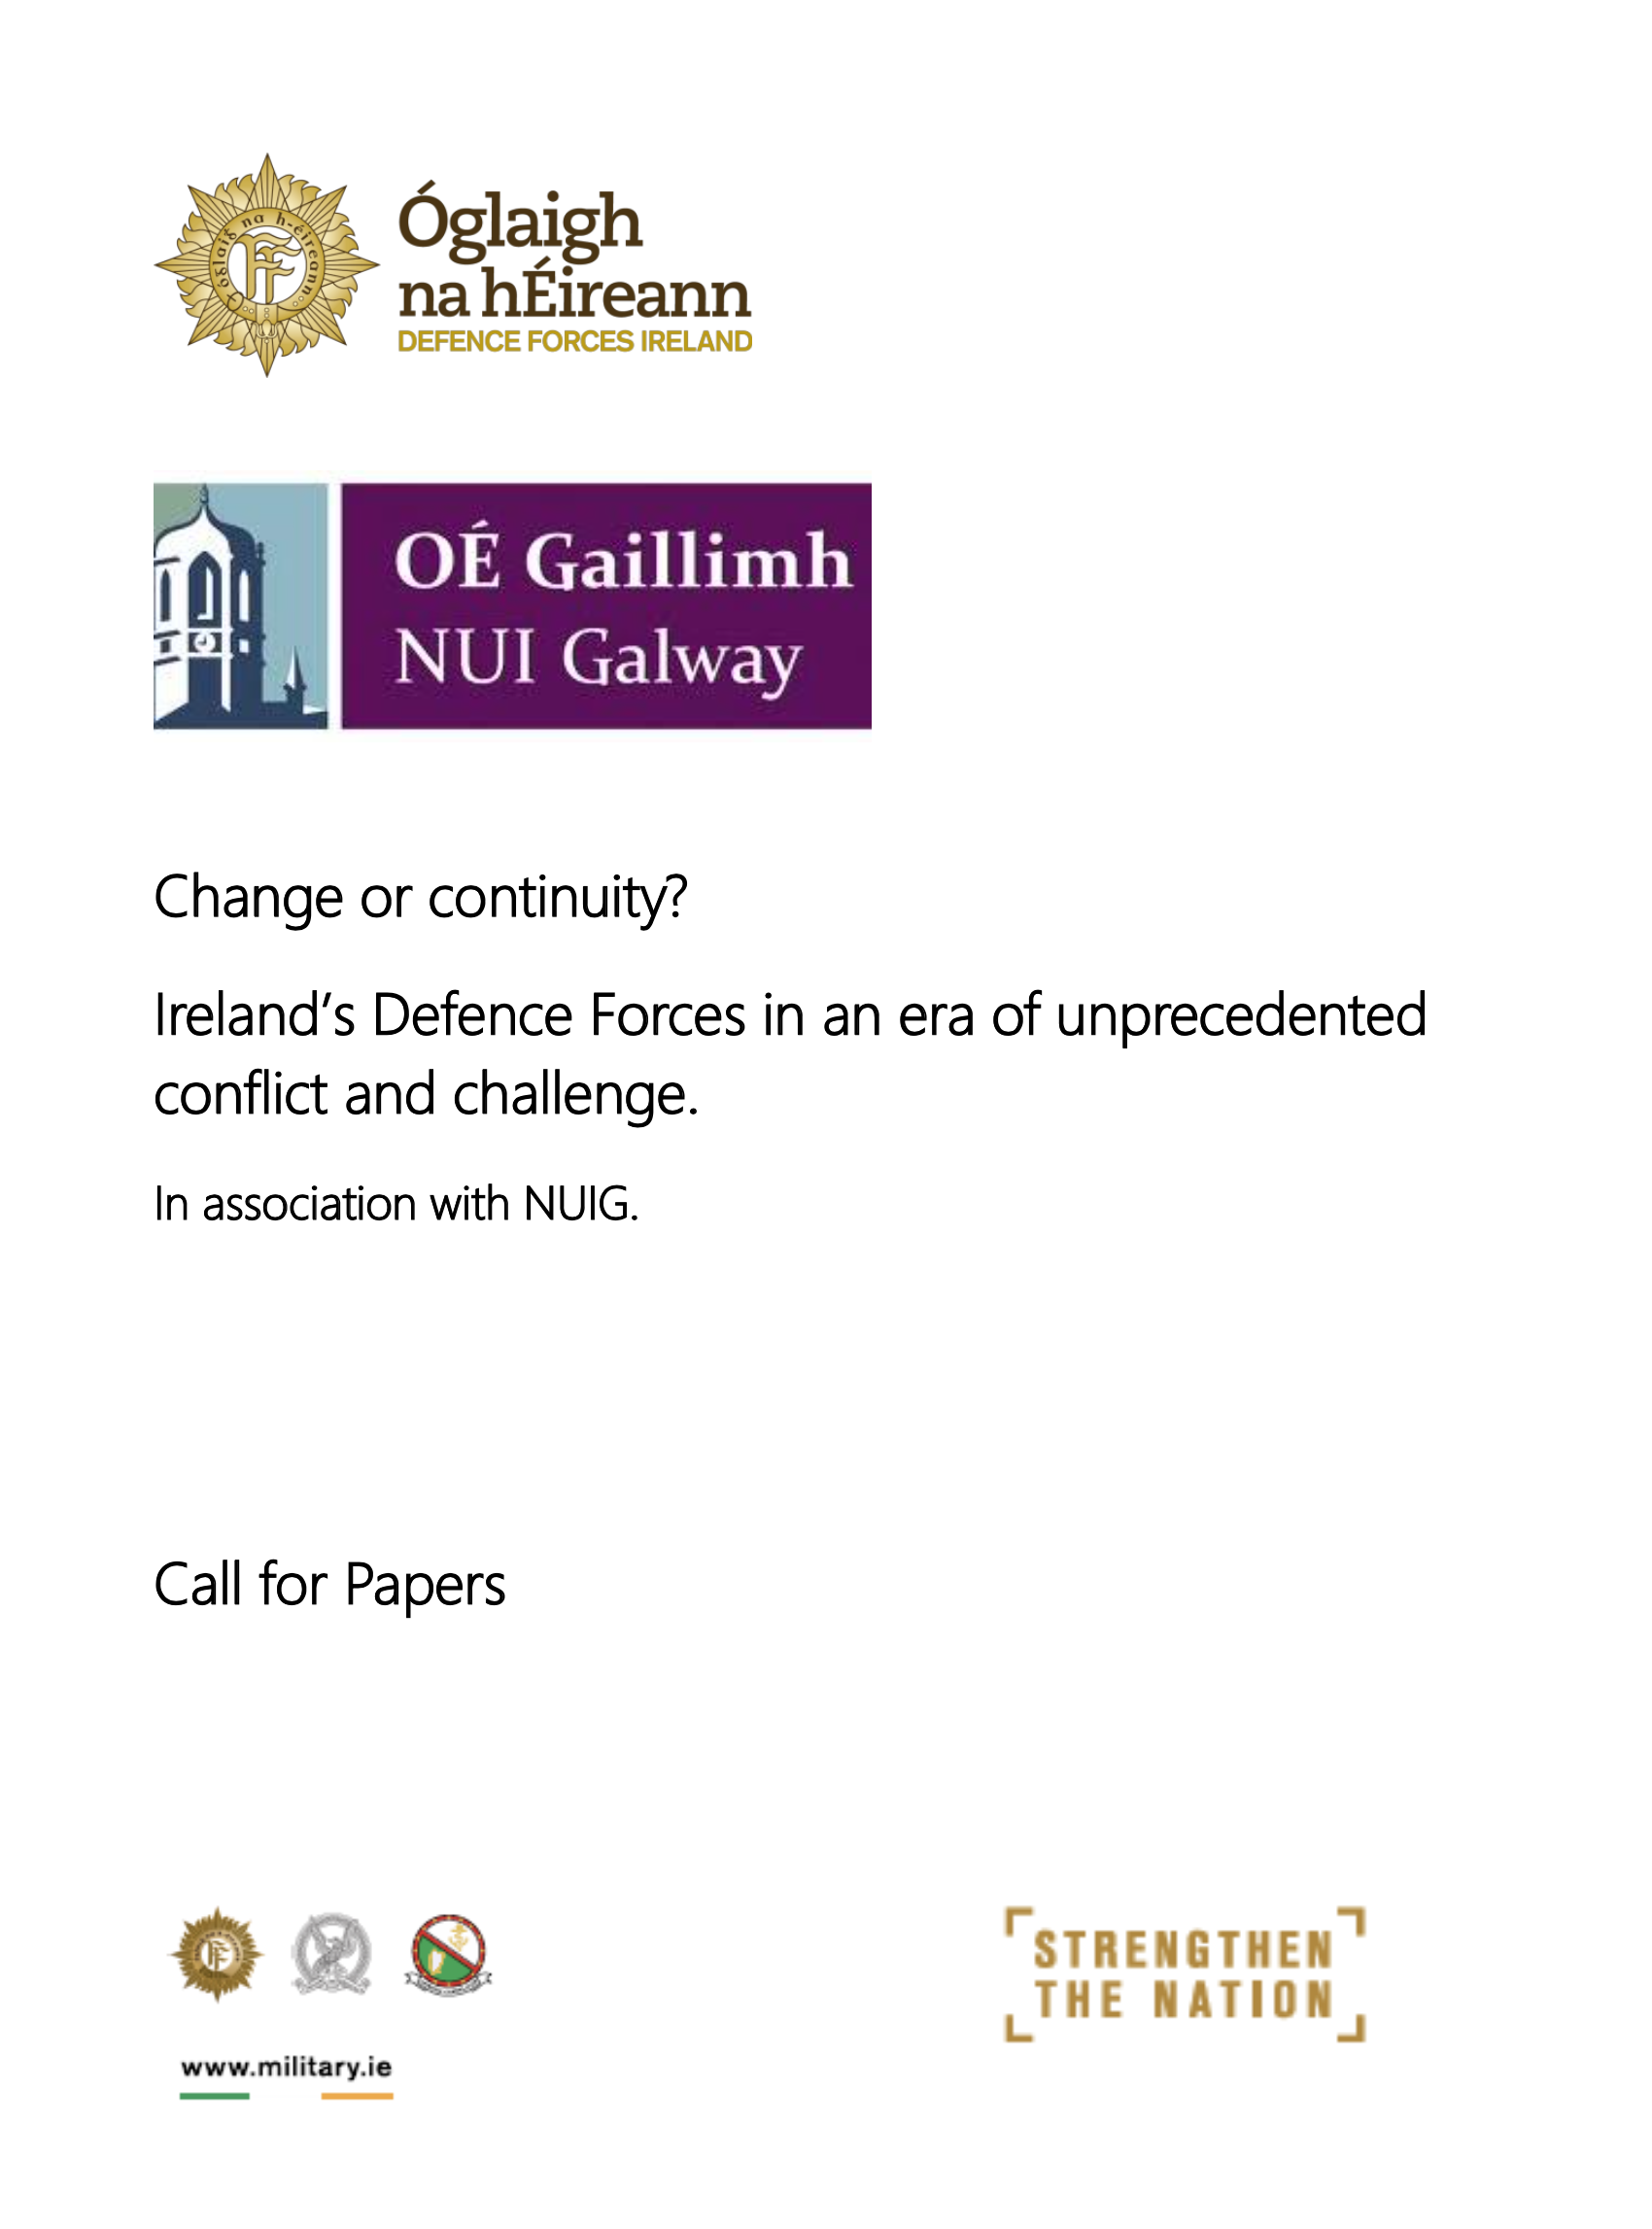 Call-for-Papers-Image-Copy